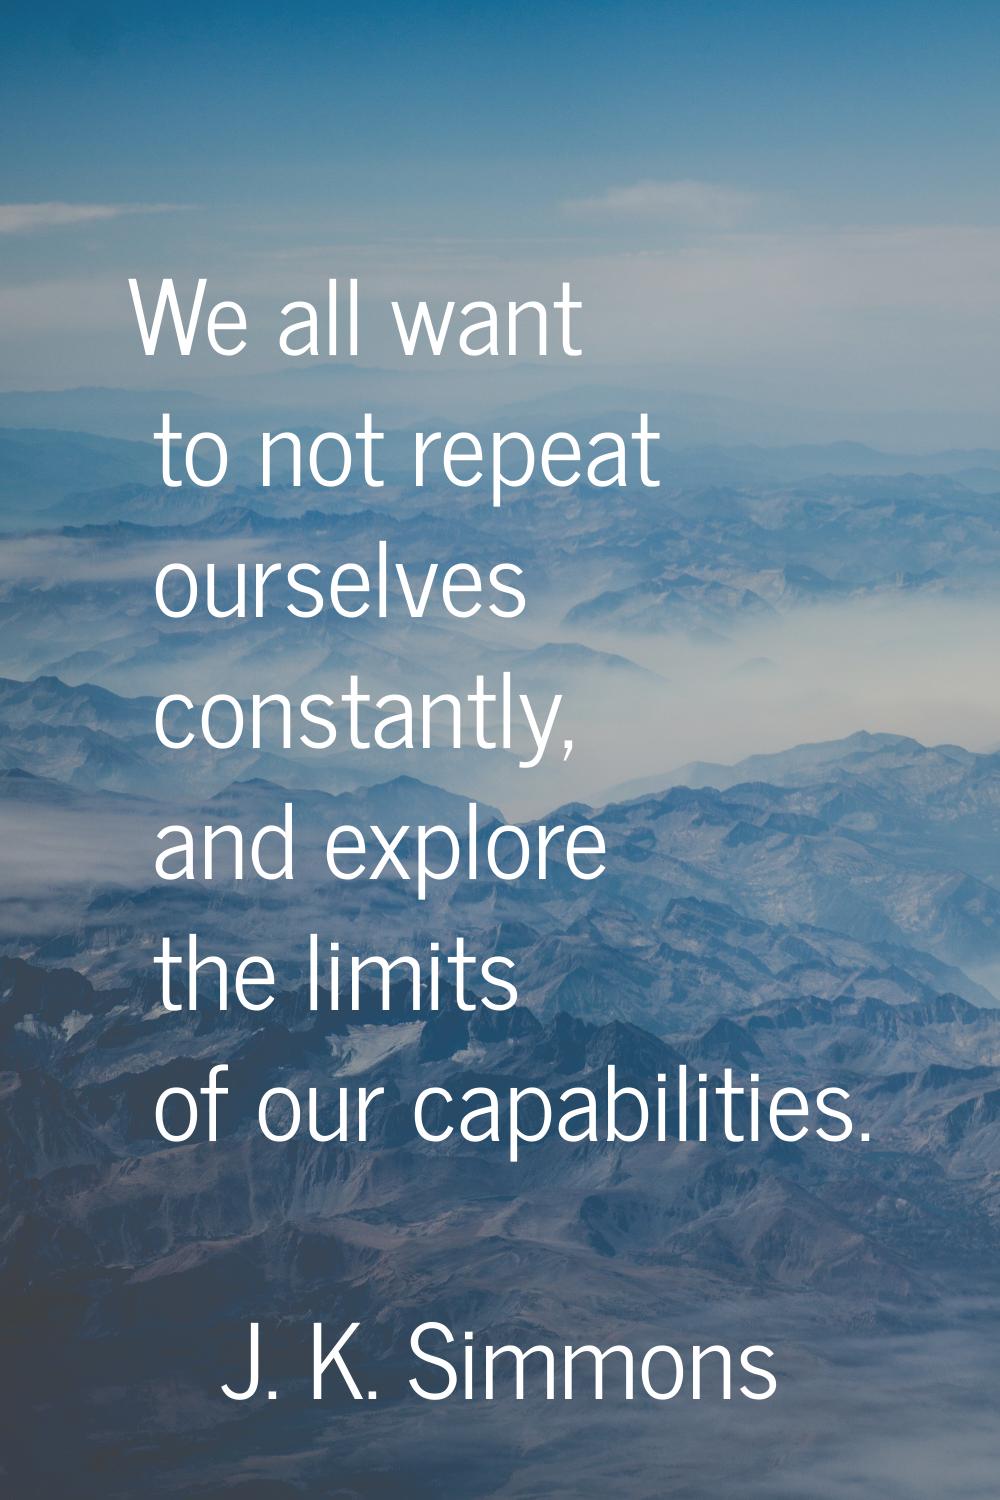 We all want to not repeat ourselves constantly, and explore the limits of our capabilities.